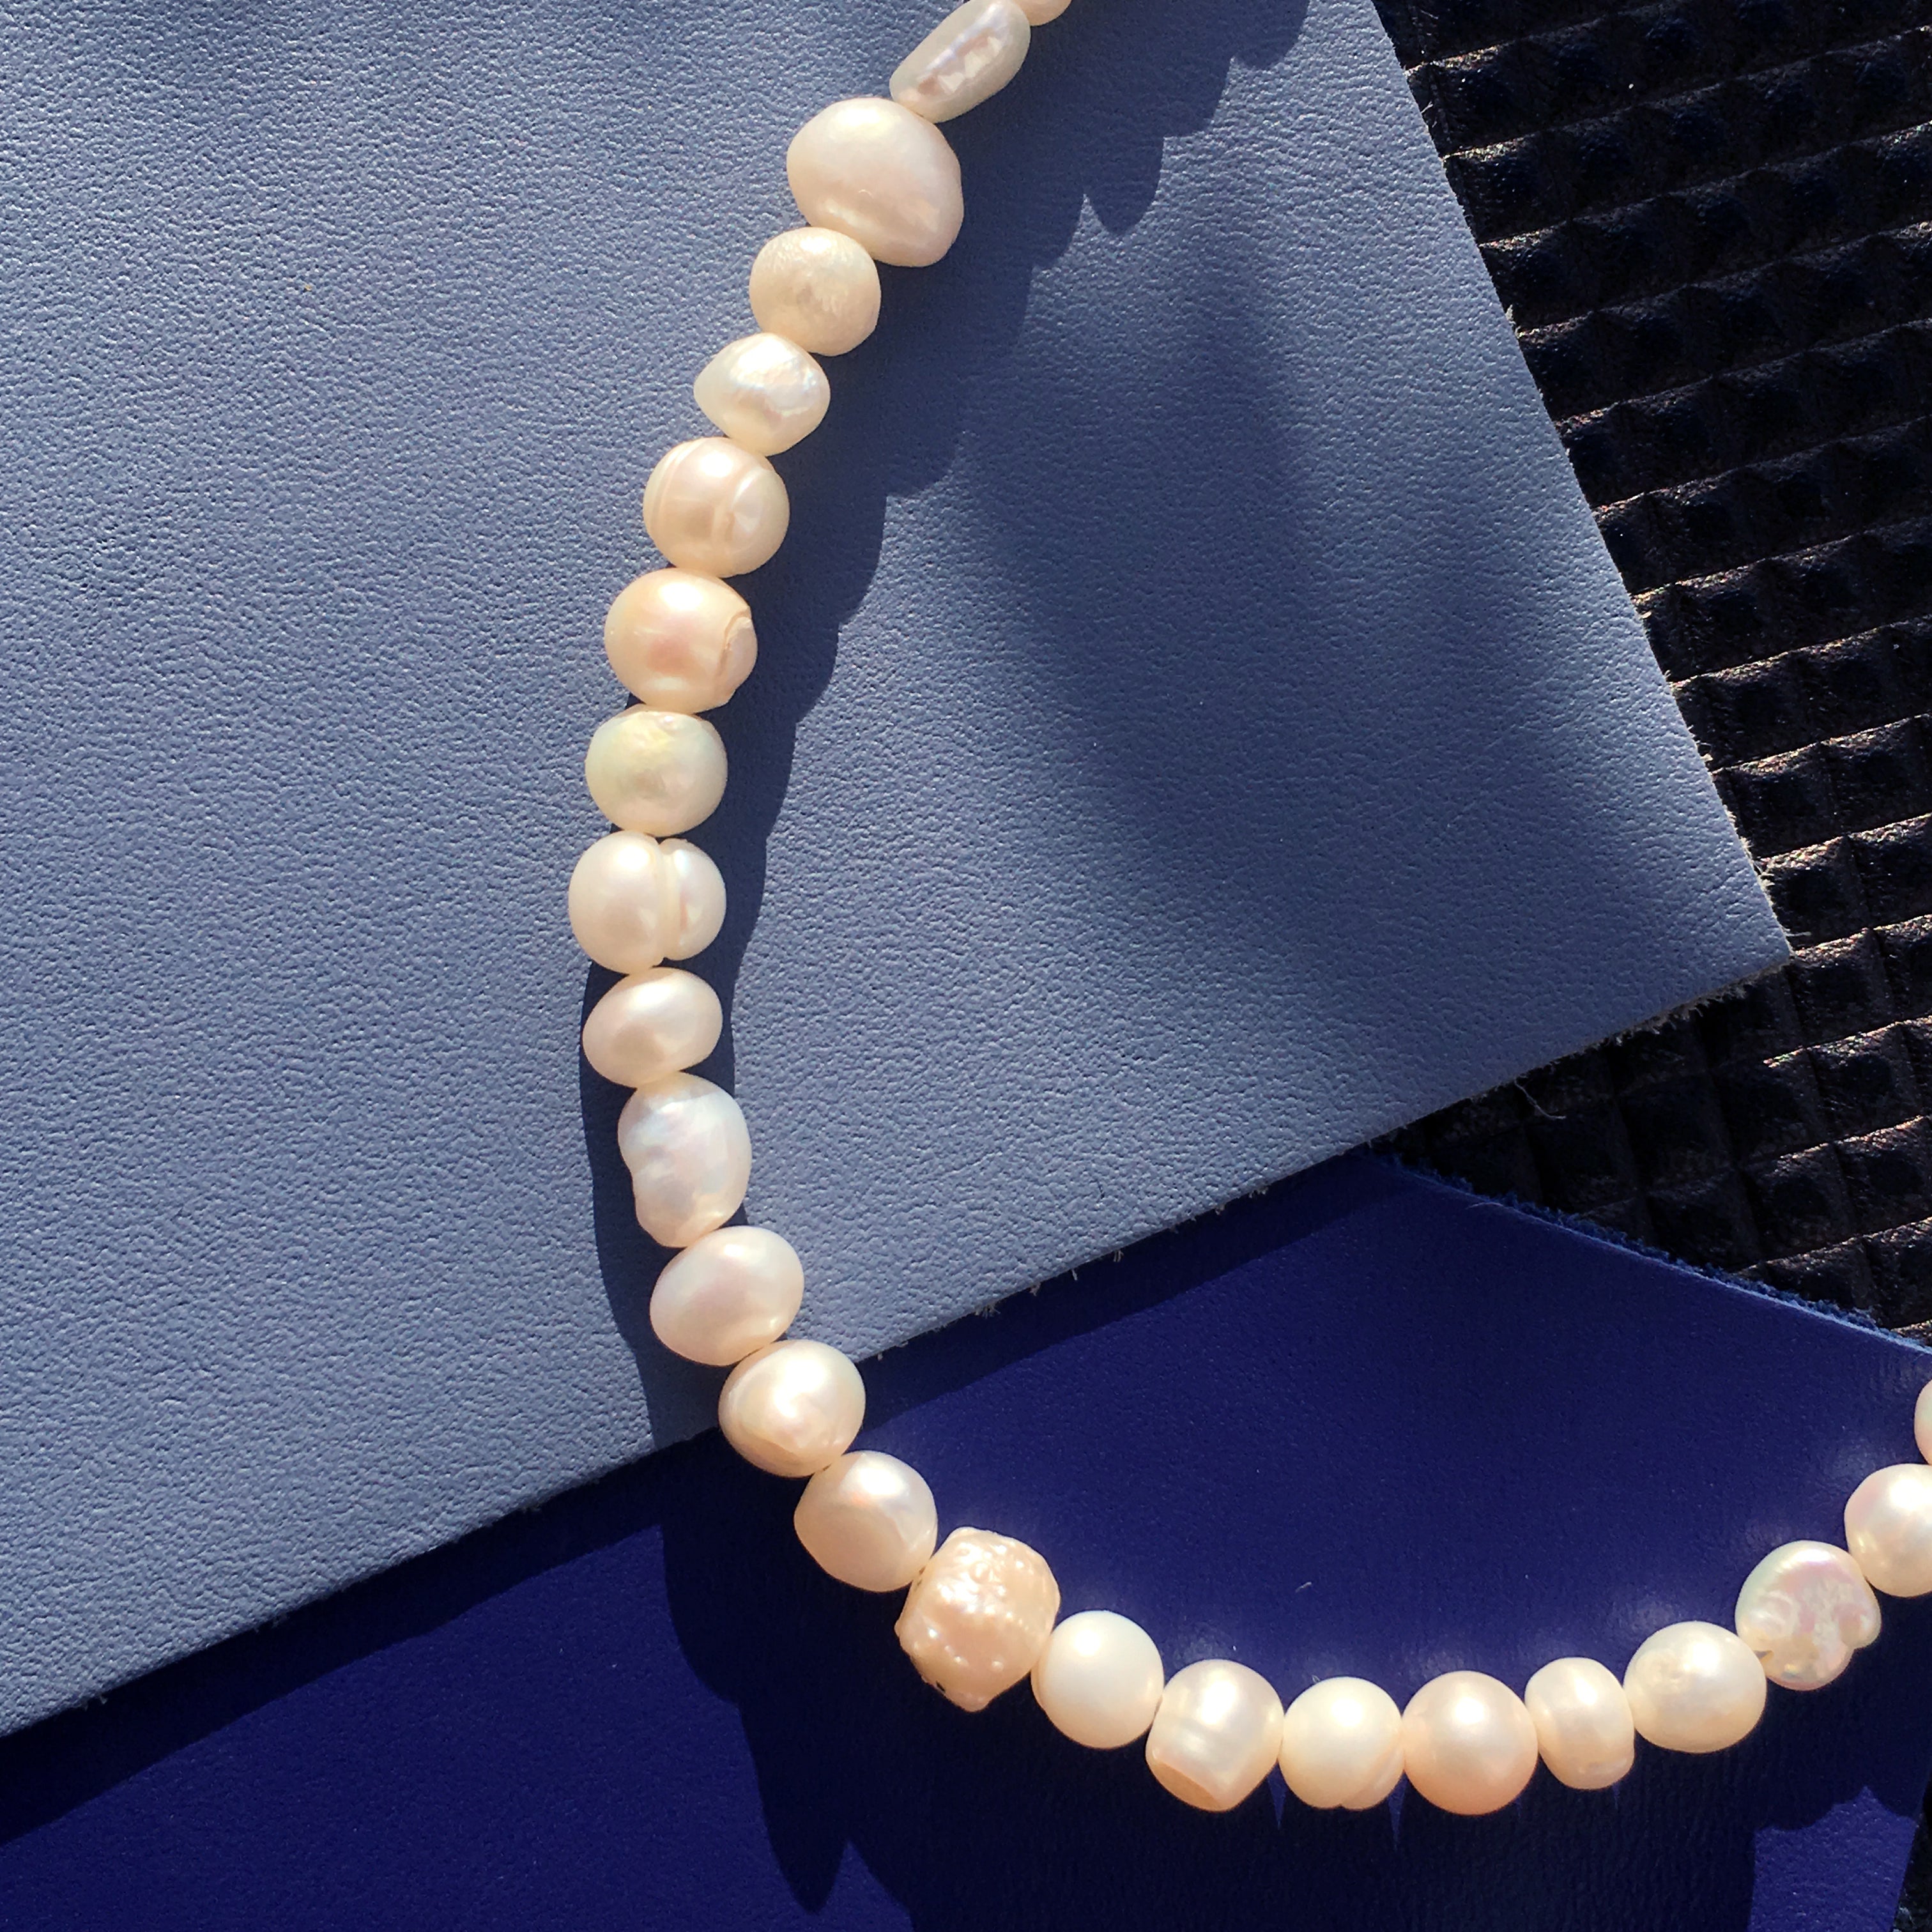 Creamy Pearl Necklace and Bracelet Set - Timeless and Elegant Jewelry for Any Occasion Bijou Her